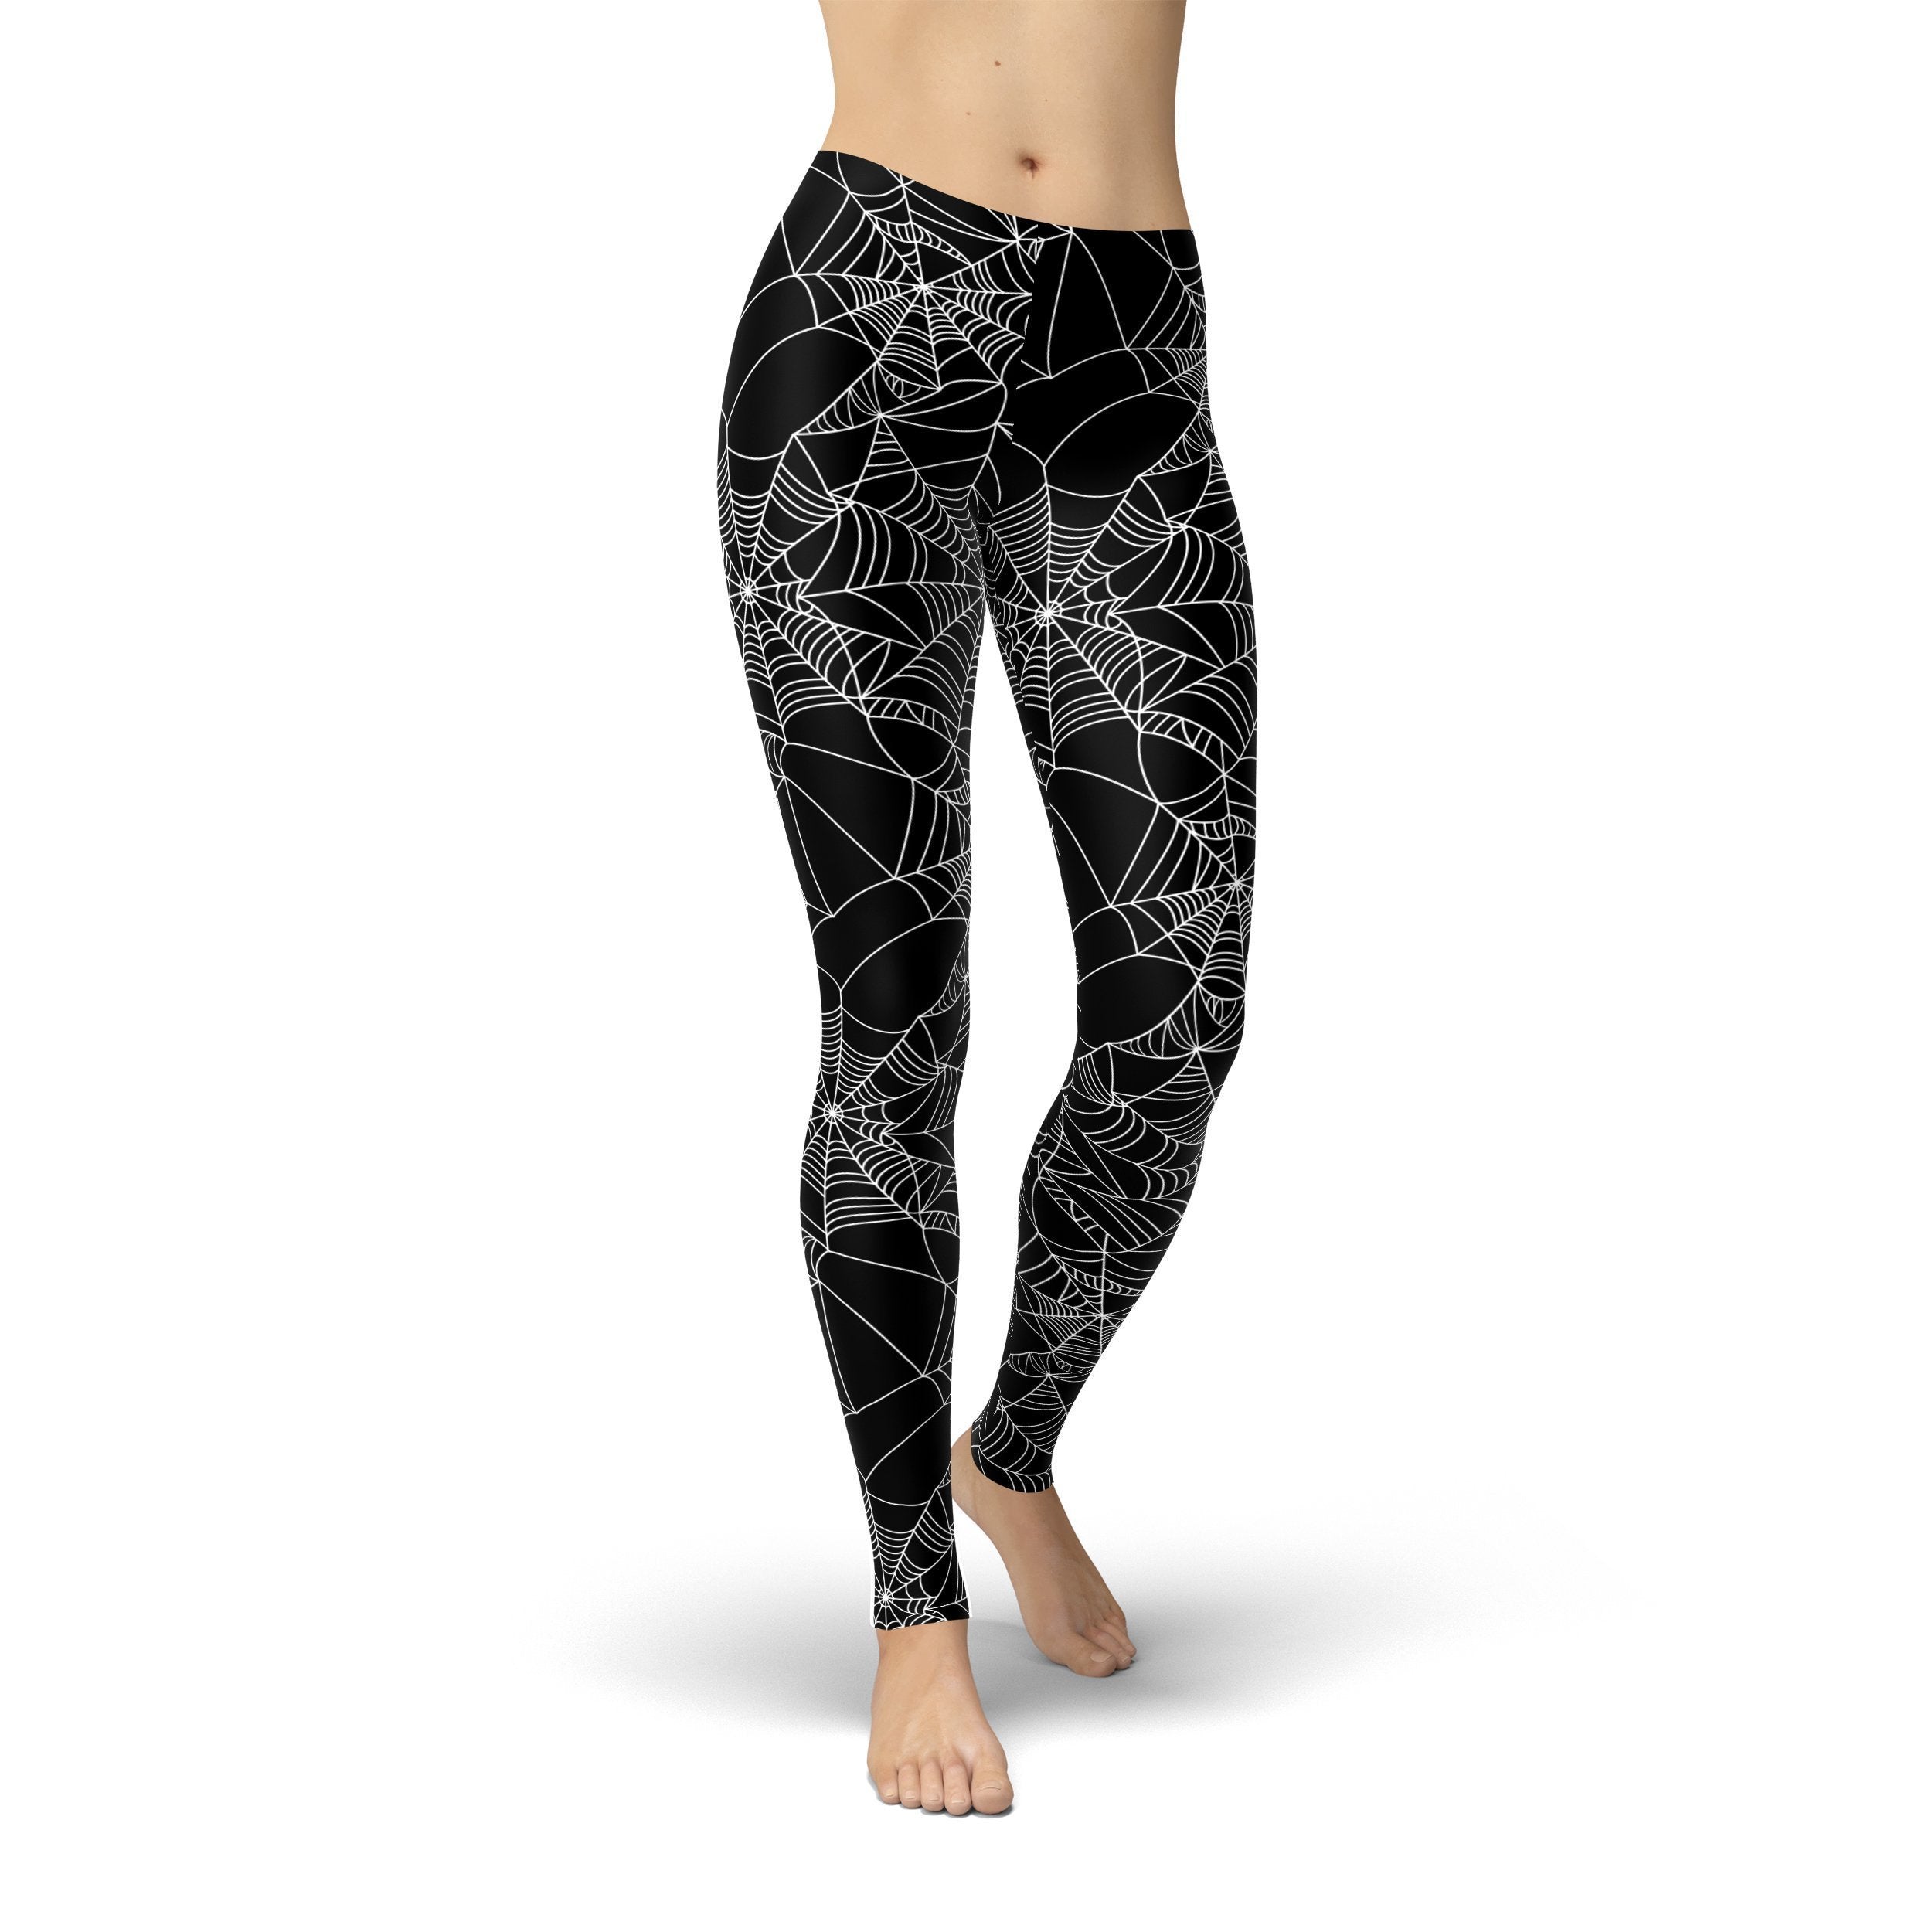 Spider Web Glow in The Dark Women's High Waisted Yoga Pants